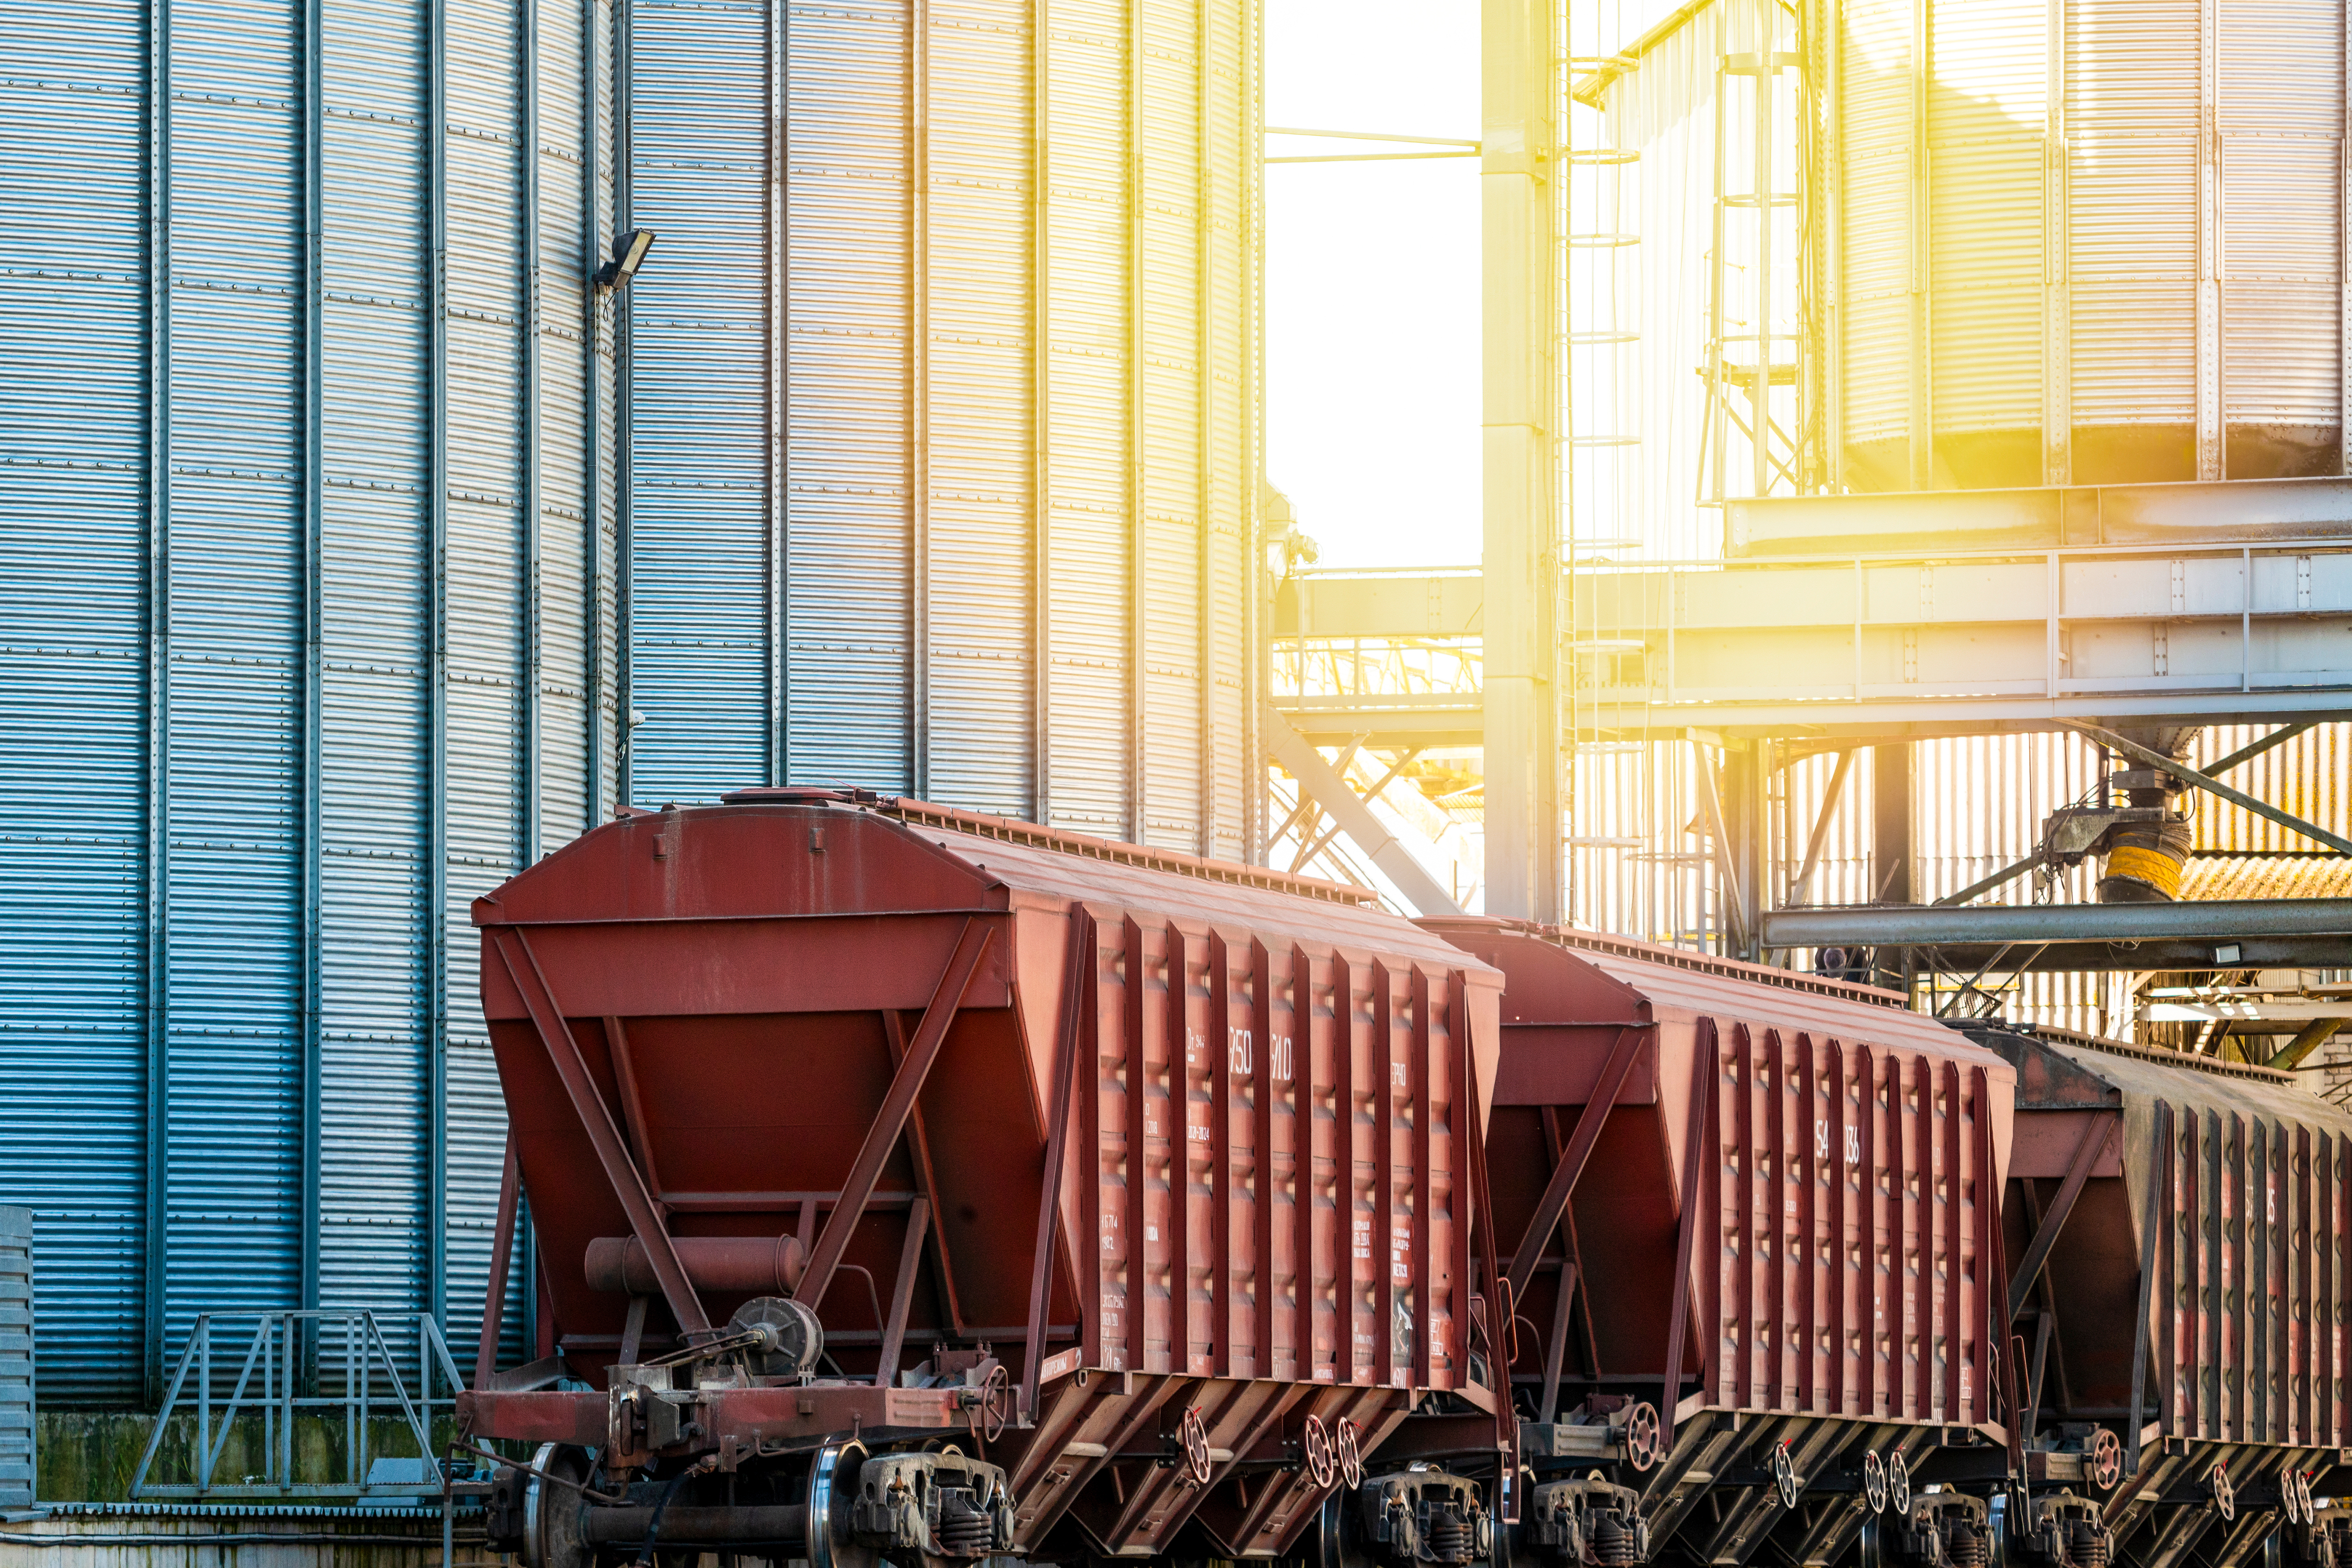 The Challenges of Transporting and Storing Grain